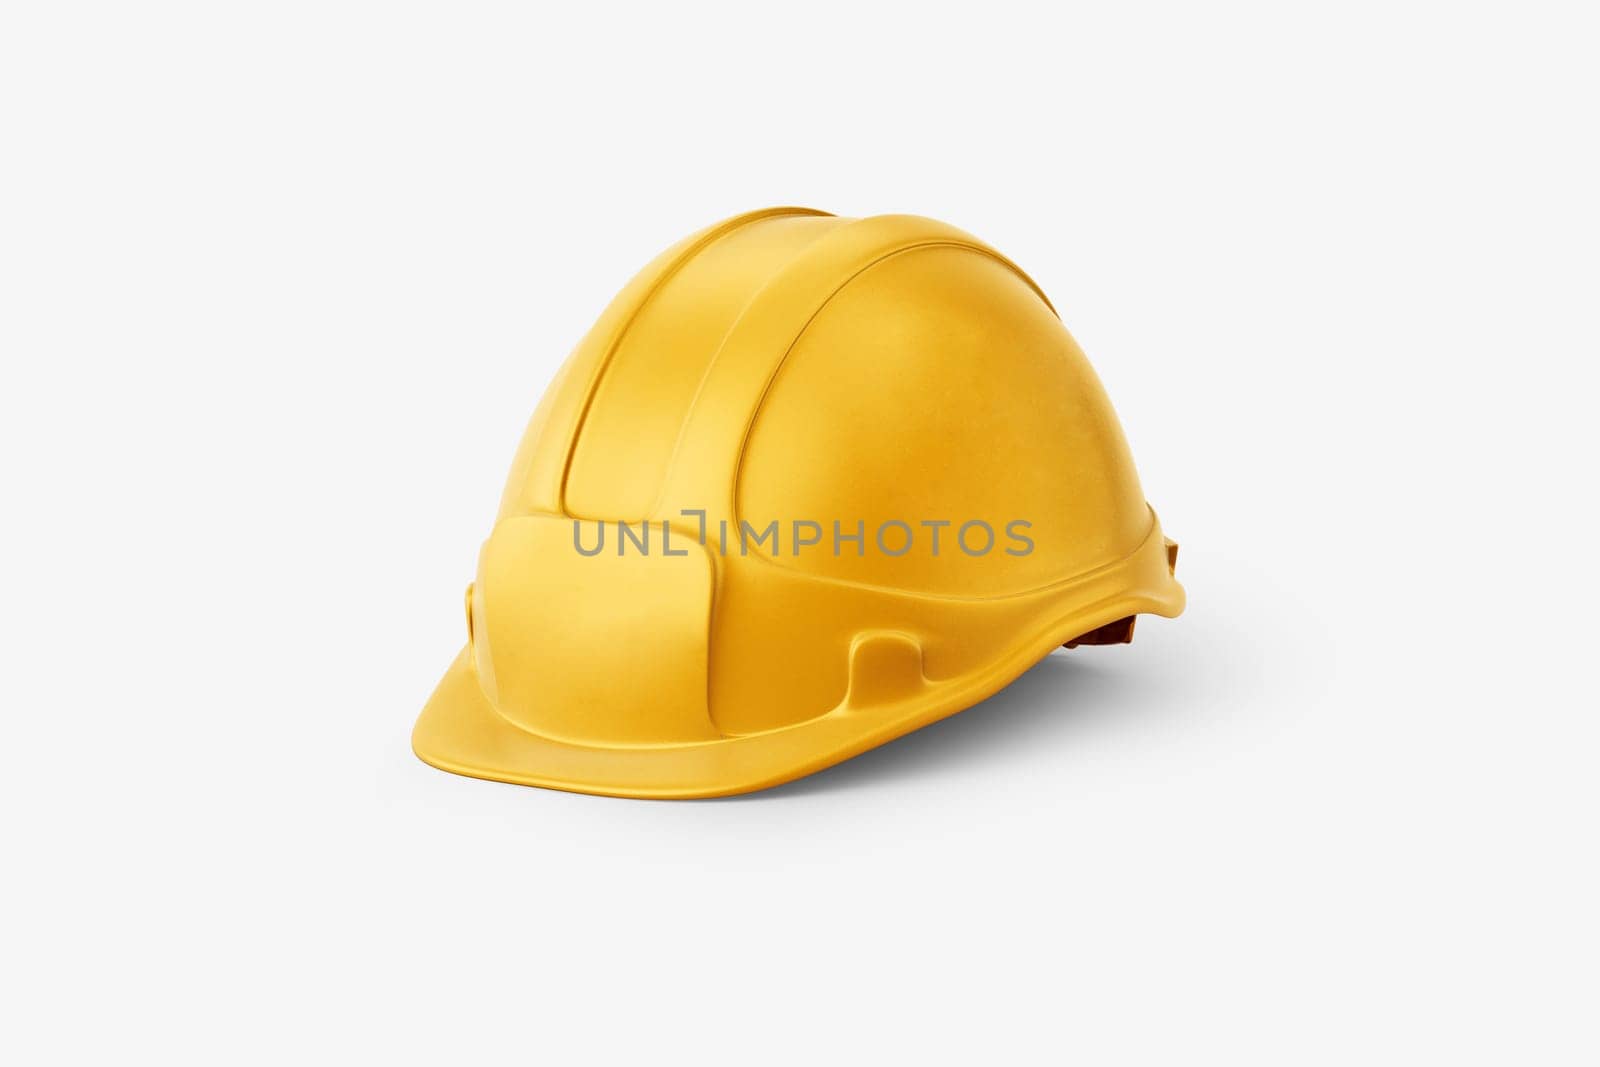 Construction yellow helmet on a white background by Mastak80